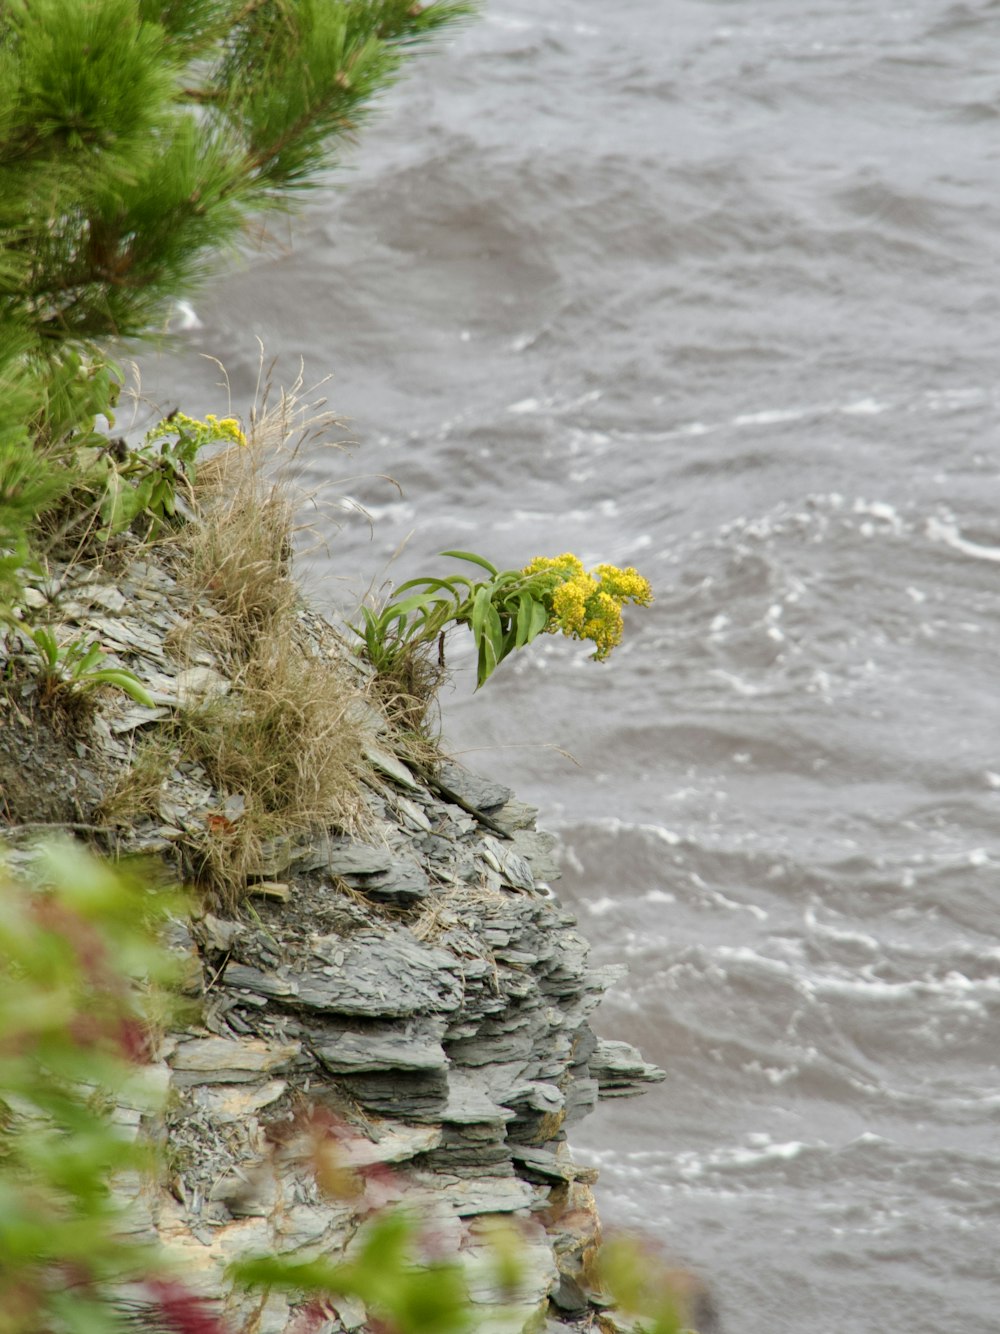 a tree stump with yellow flowers